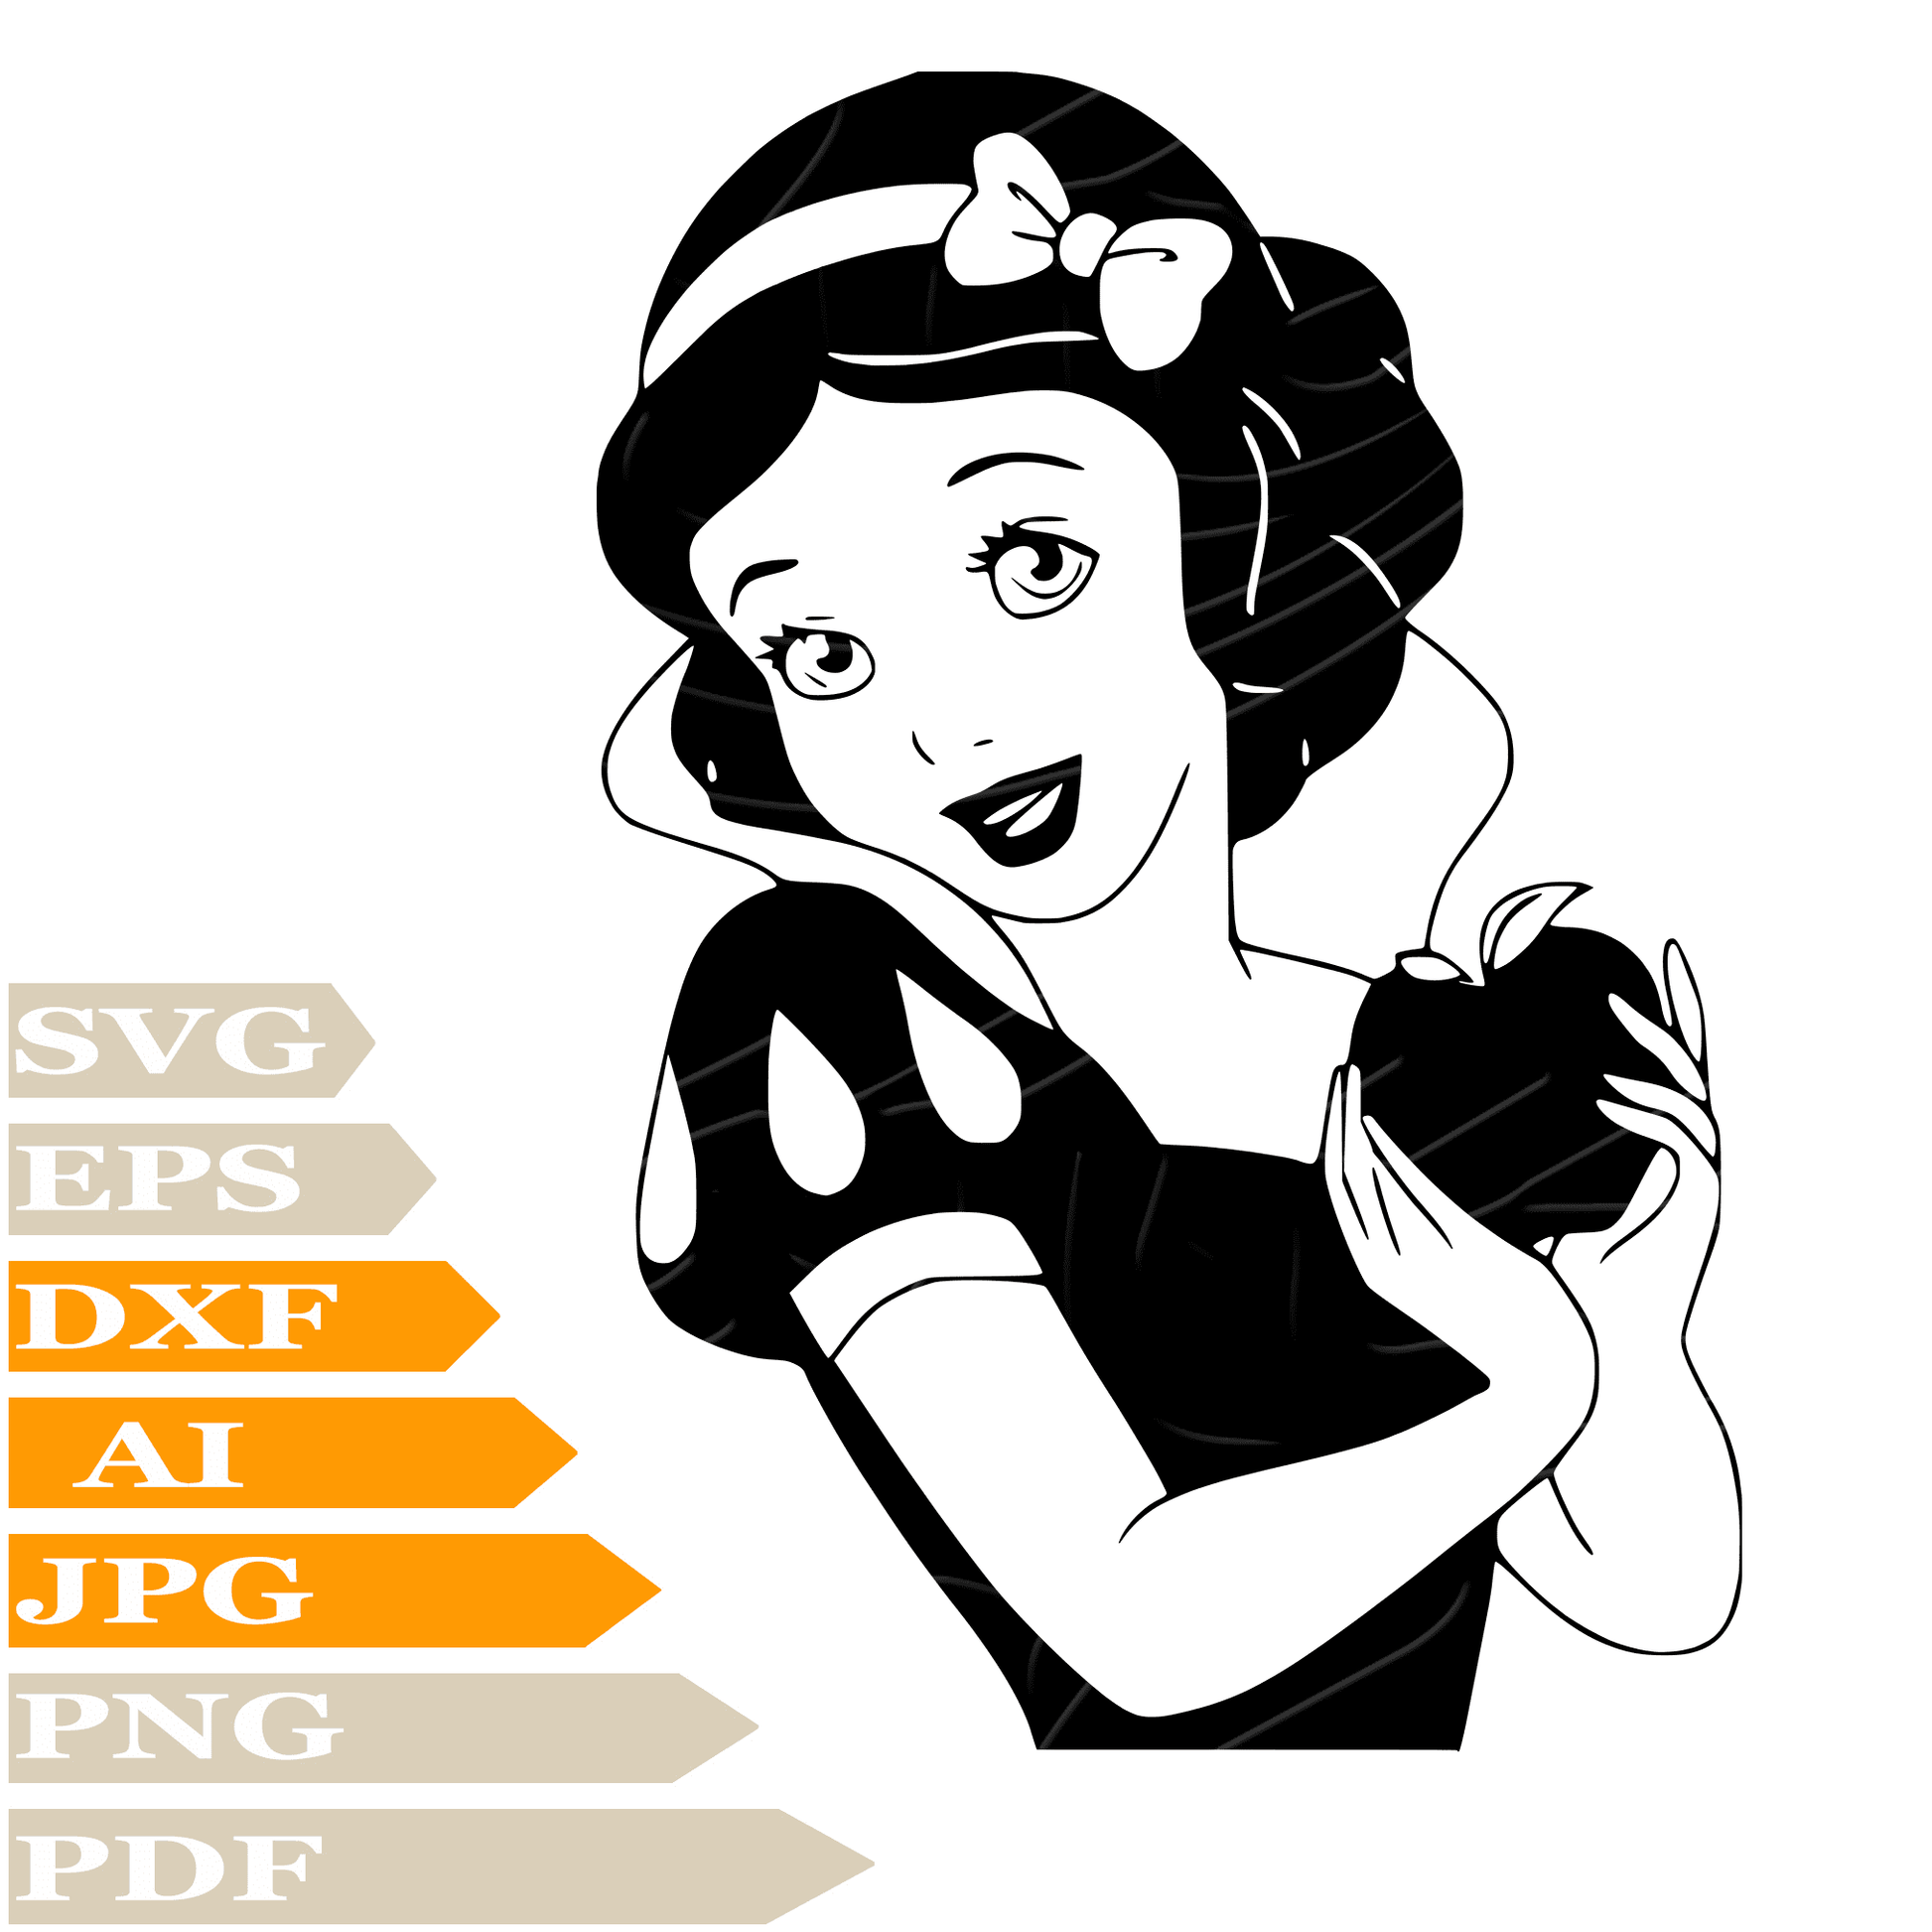 Snow White SVG-Princess Personalized SVG-Snow White Drawing SVG-Snow White Vector Illustration-PNG-Decal-Cricut-Digital Files-Clip Art-Cut File-For Shirts-Silhouette